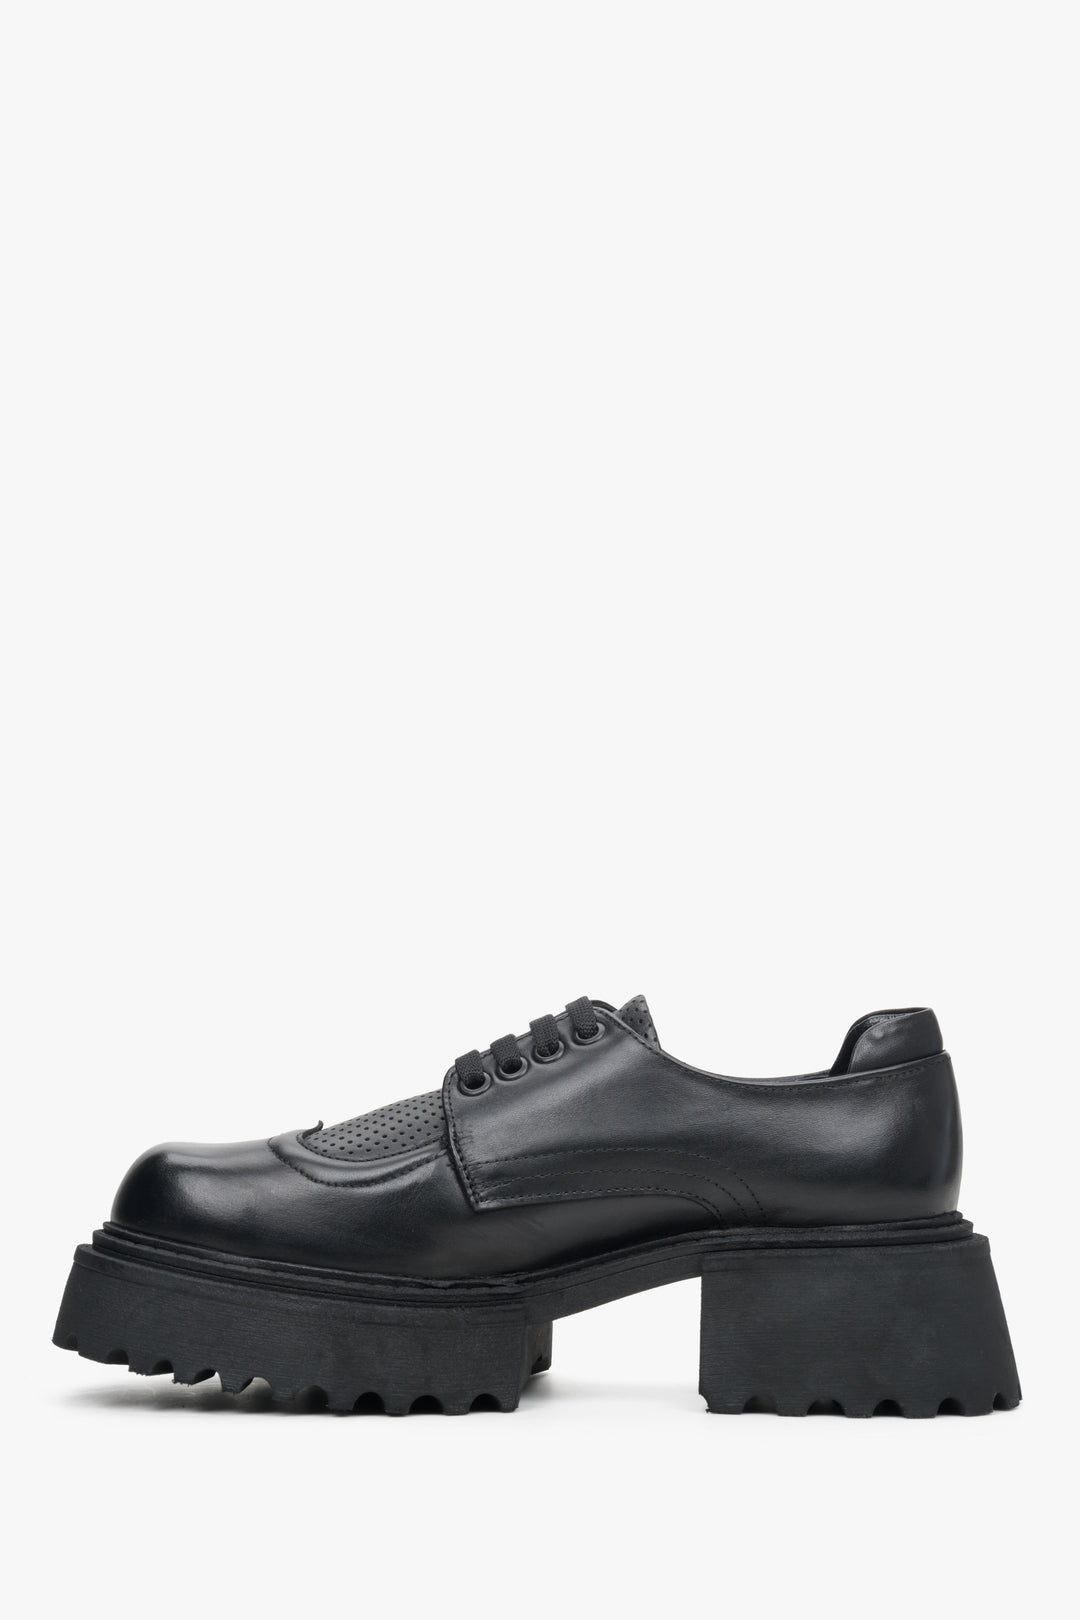  Women's lace-up leather shoes in black by Estro - shoe profile.